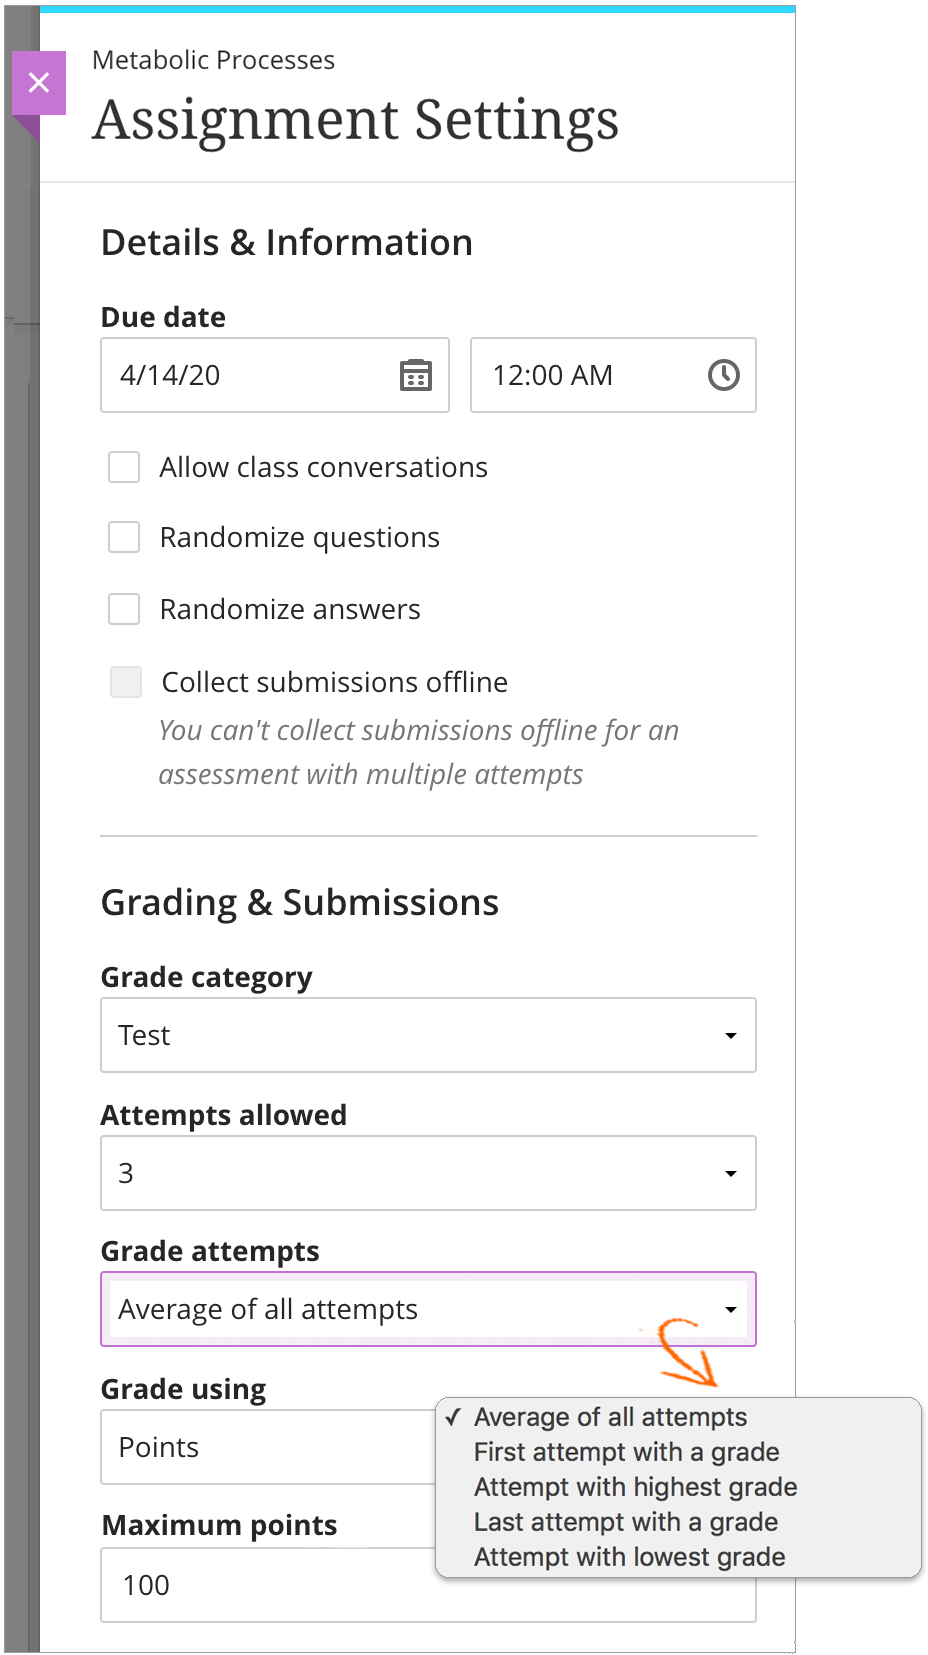 The Assignment settings panel is open with the "Grade attempts" dropdown list displayed and the "Average of all attempts" option selected. 